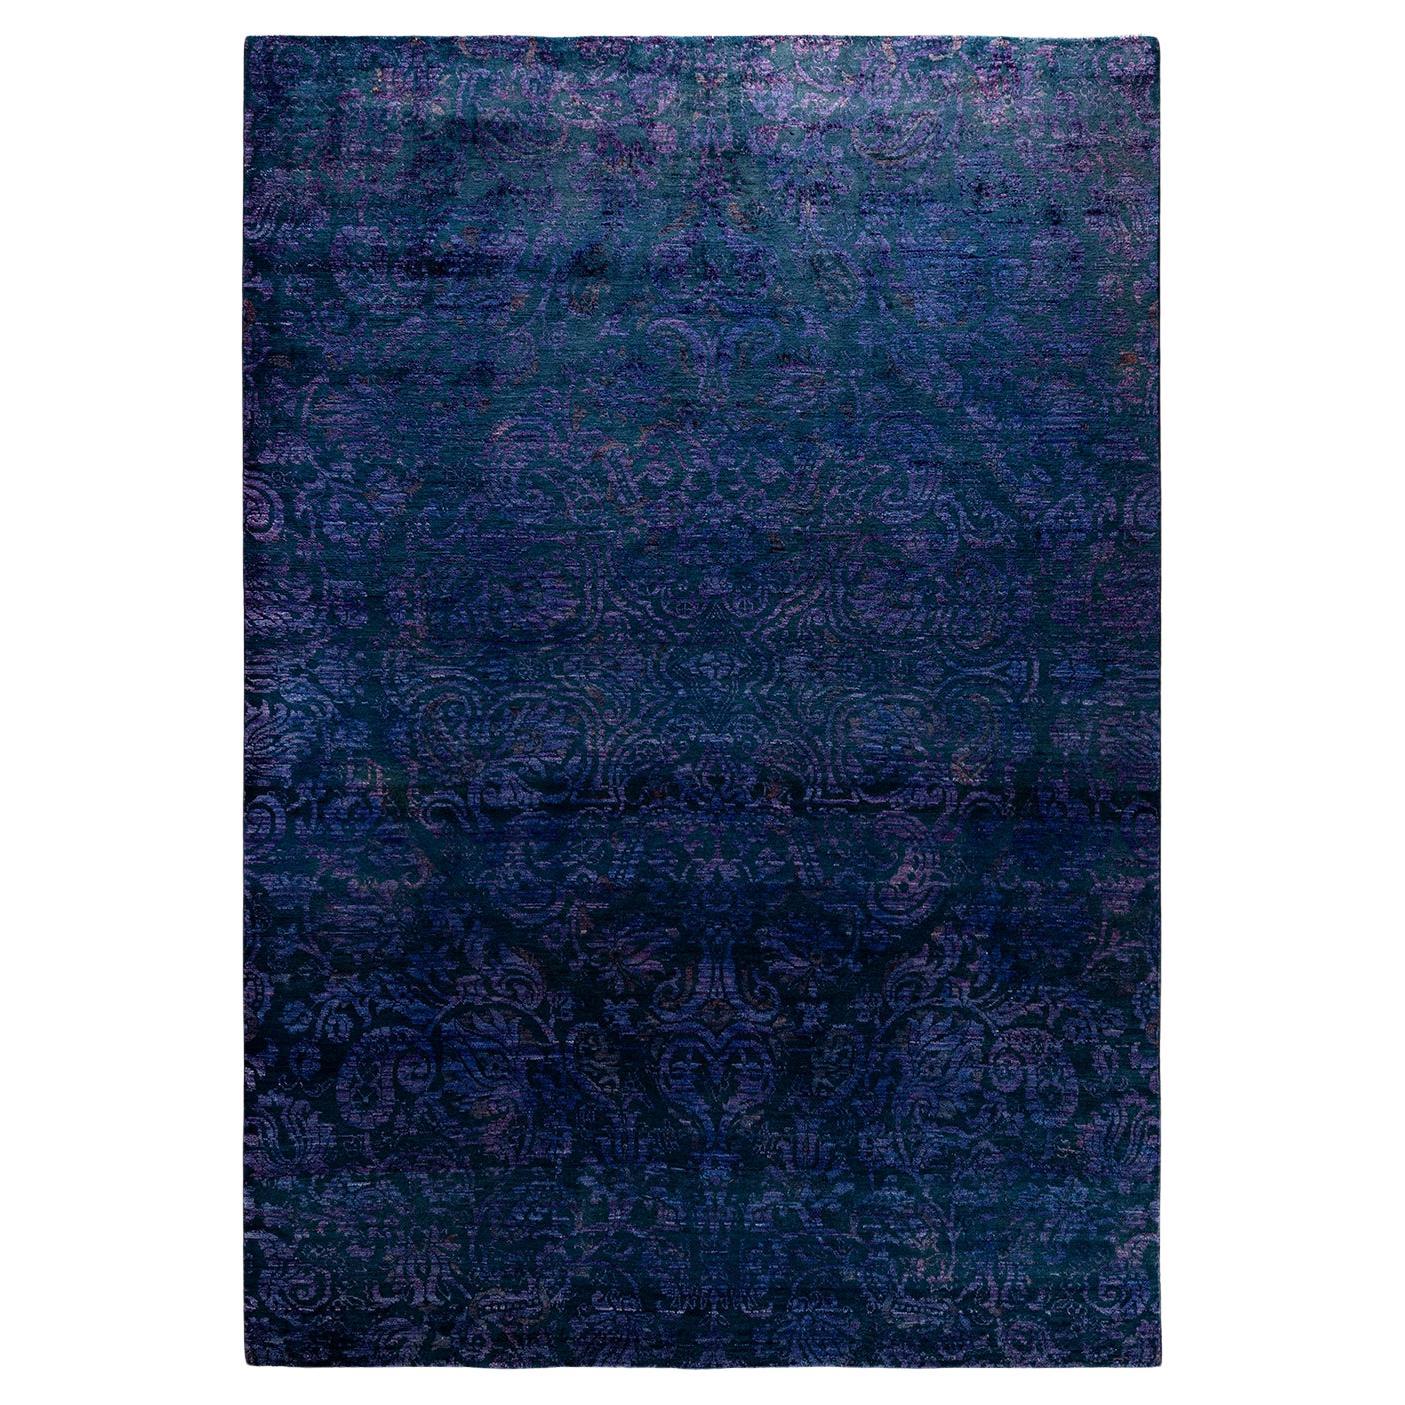 Contemporary Vibrance Hand Knotted Wool Purple Area Rug 